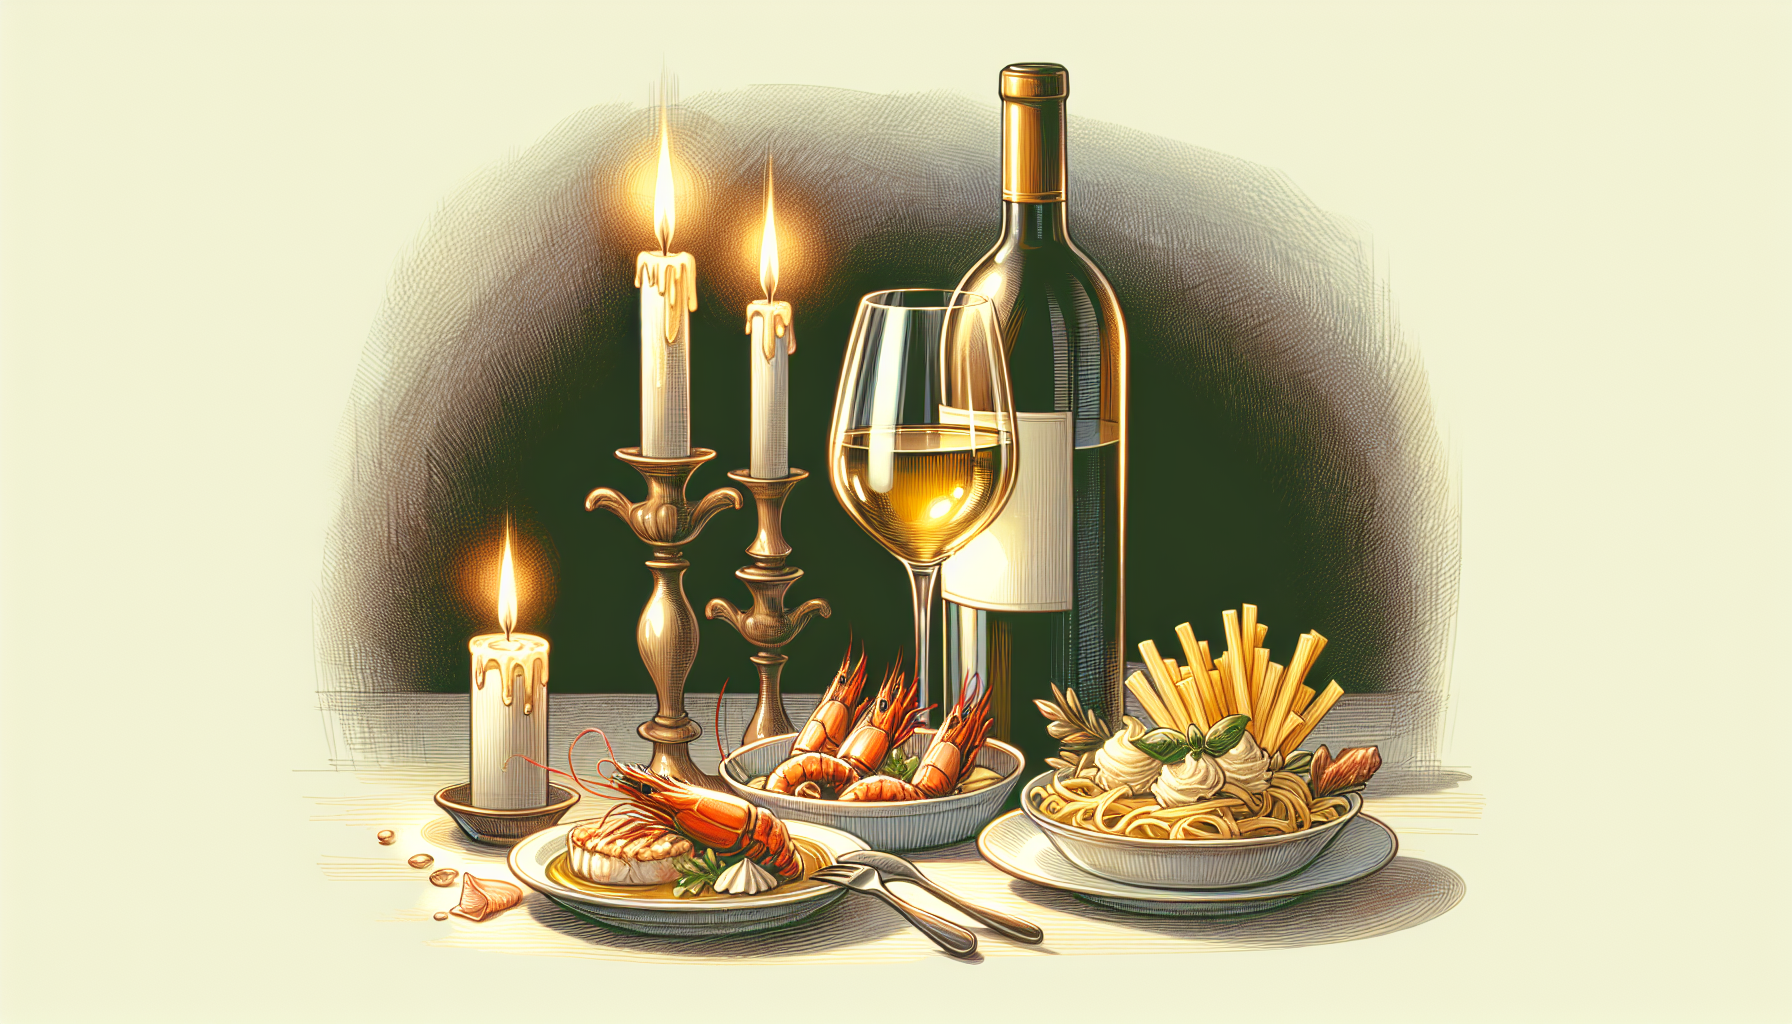 Illustration of a wine and food pairing showcasing the richness of chardonnay with seafood and creamy pasta